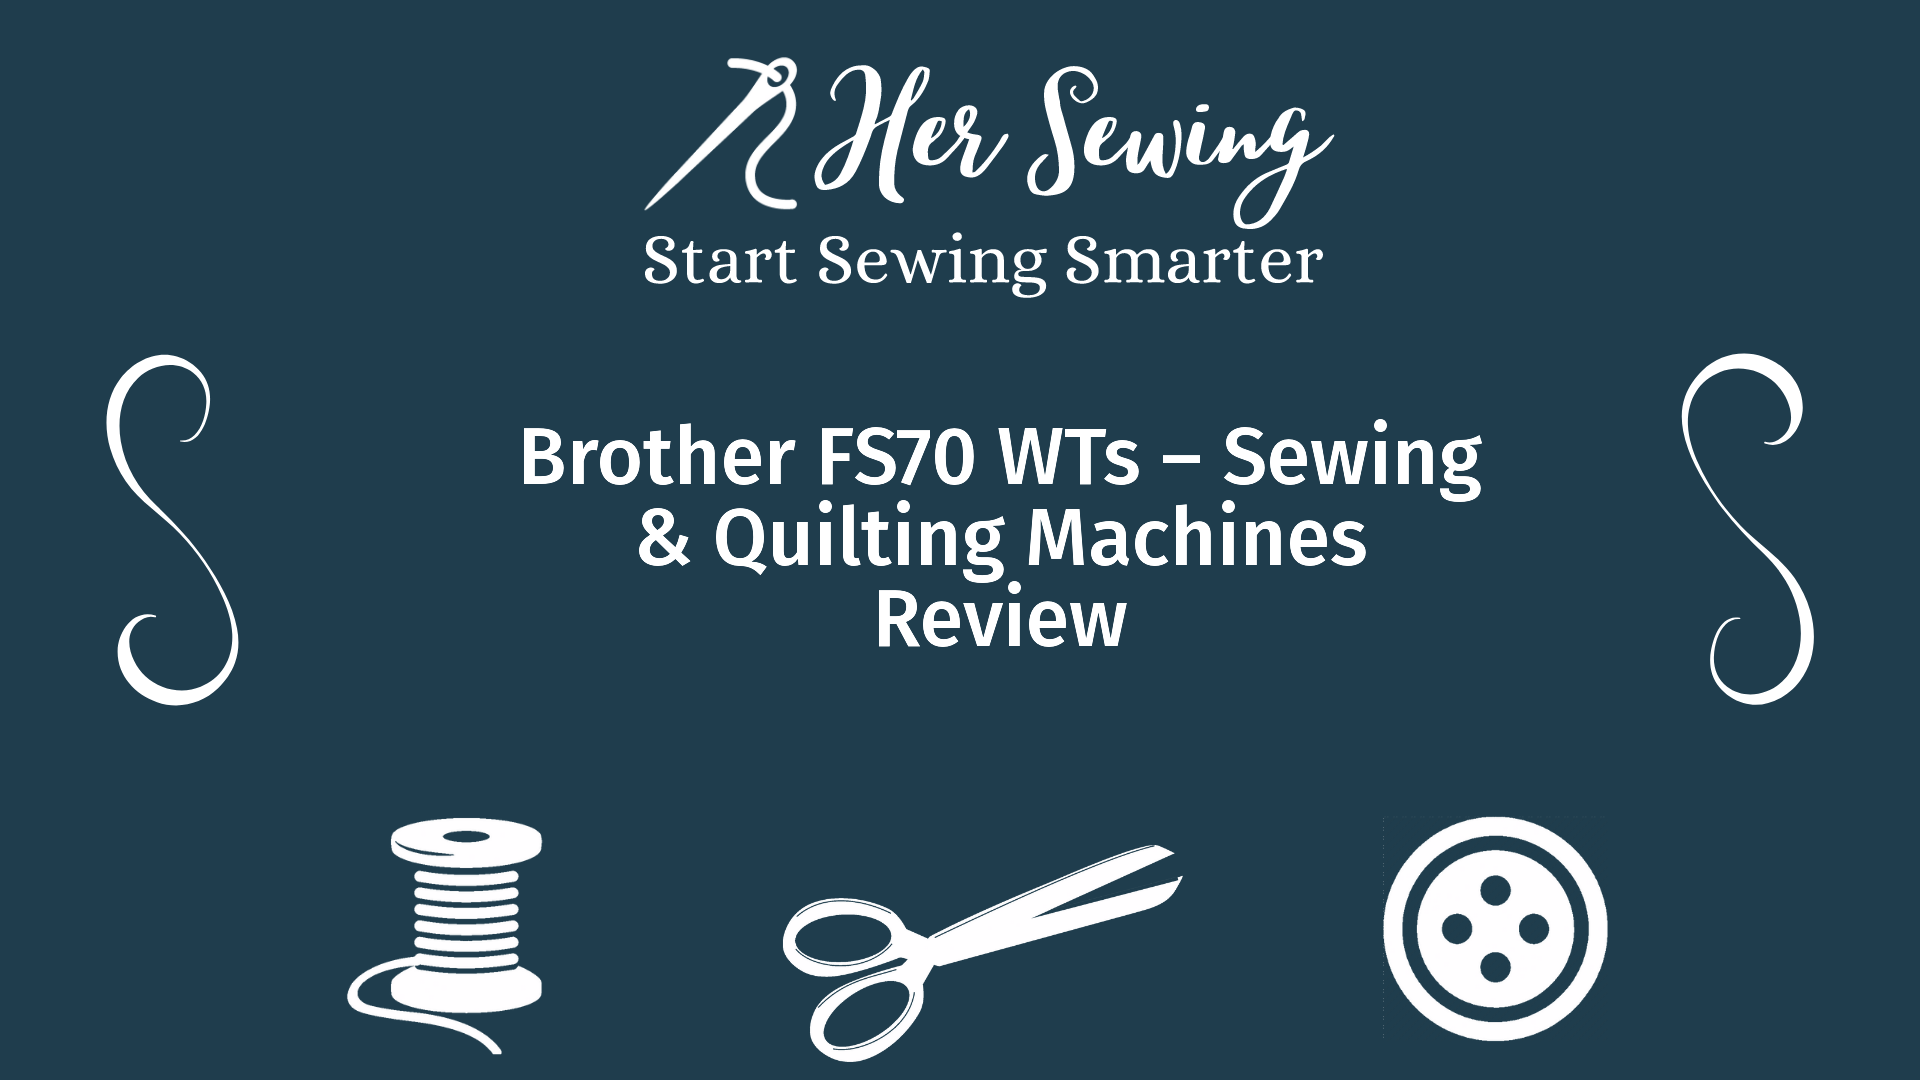 Brother FS70 WTs – Sewing & Quilting Machines Review